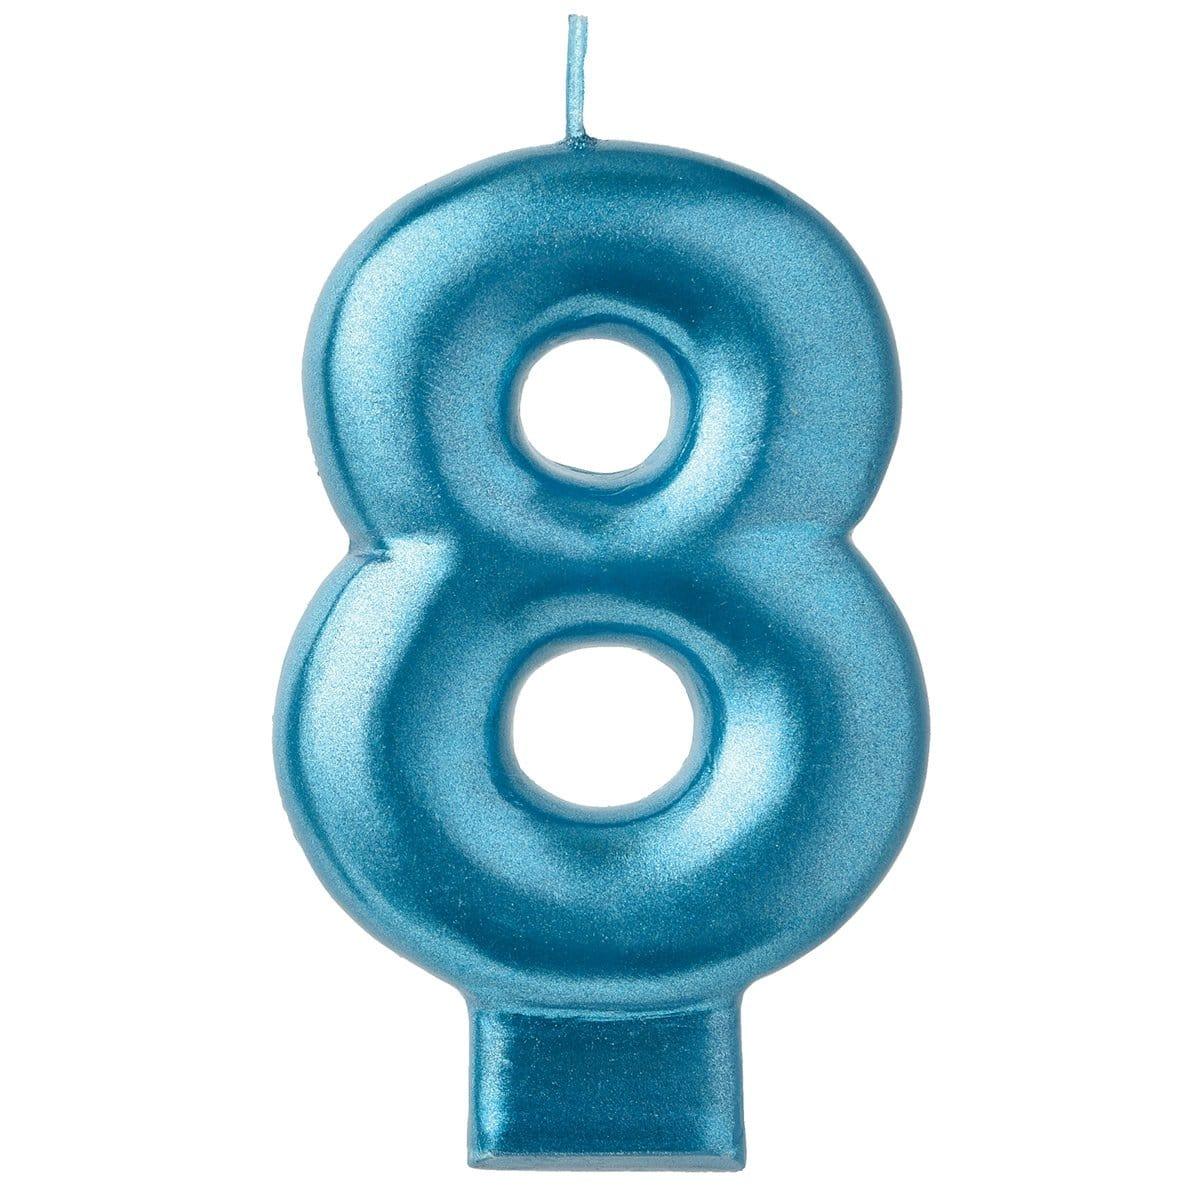 Buy Cake Supplies Blue Numeral Candle #8 sold at Party Expert